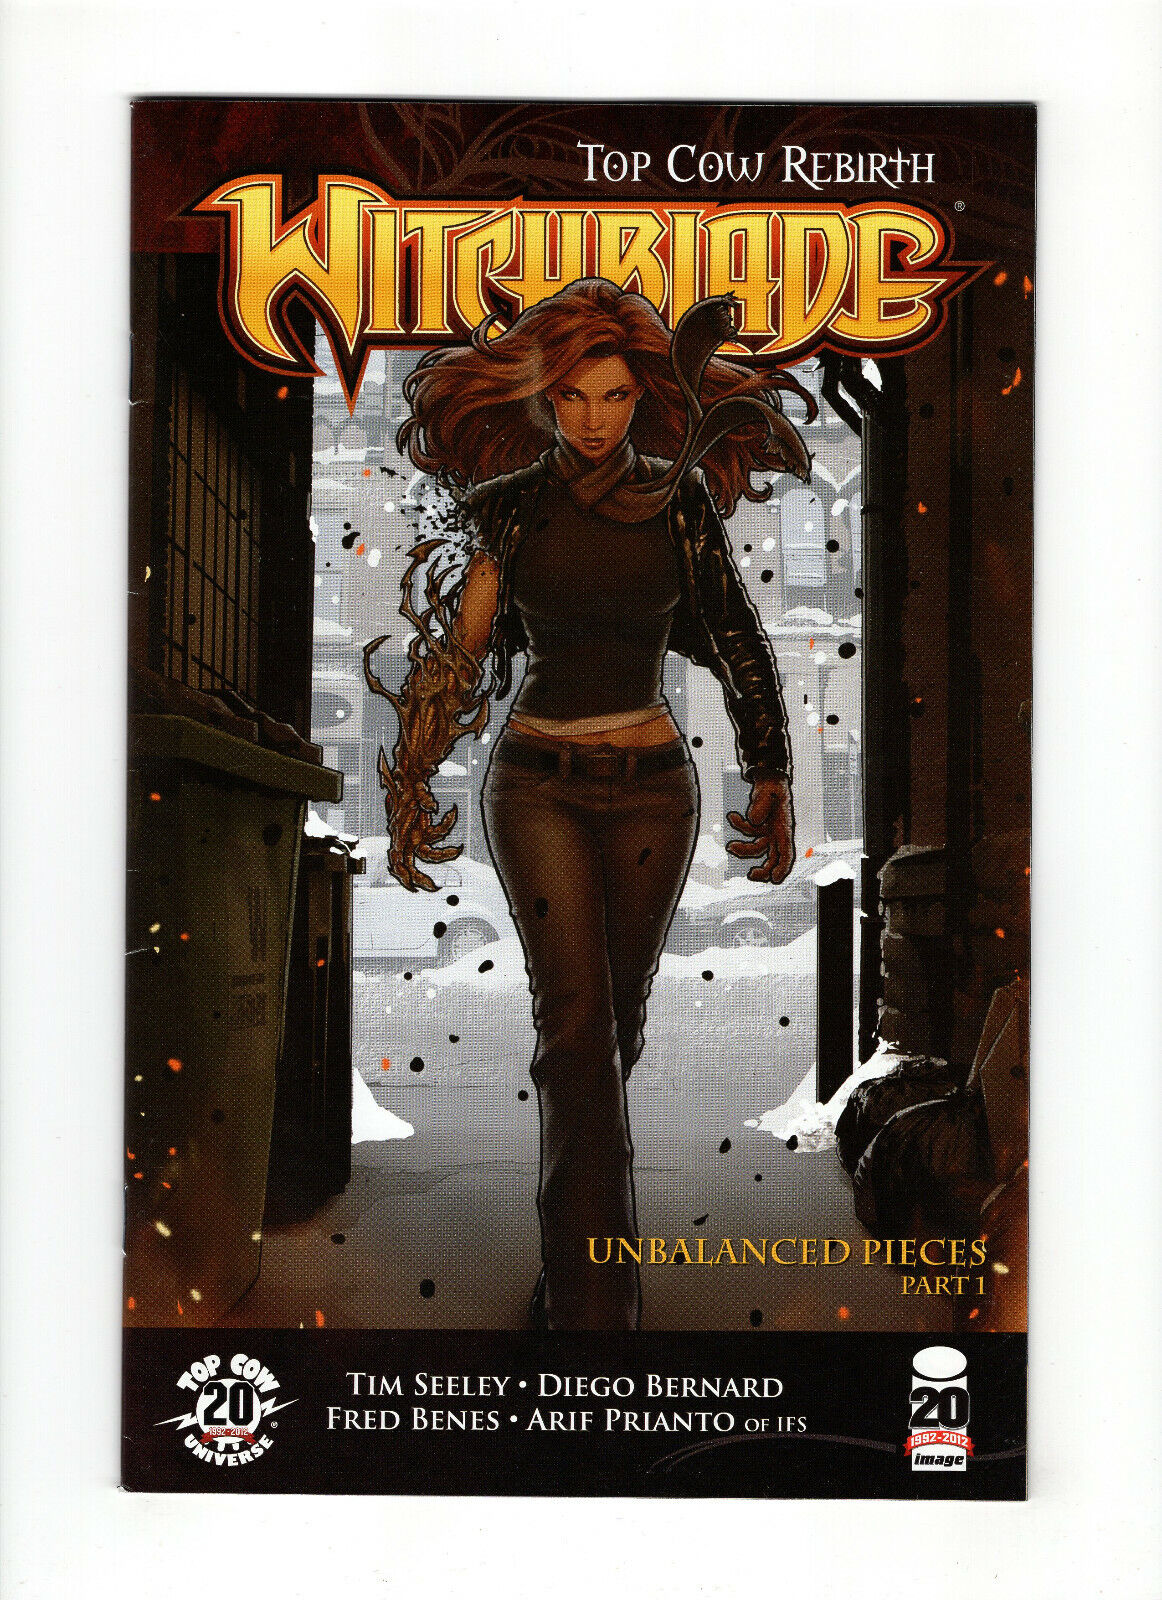 Witchblade #151 (Image/Top Cow, 2012)